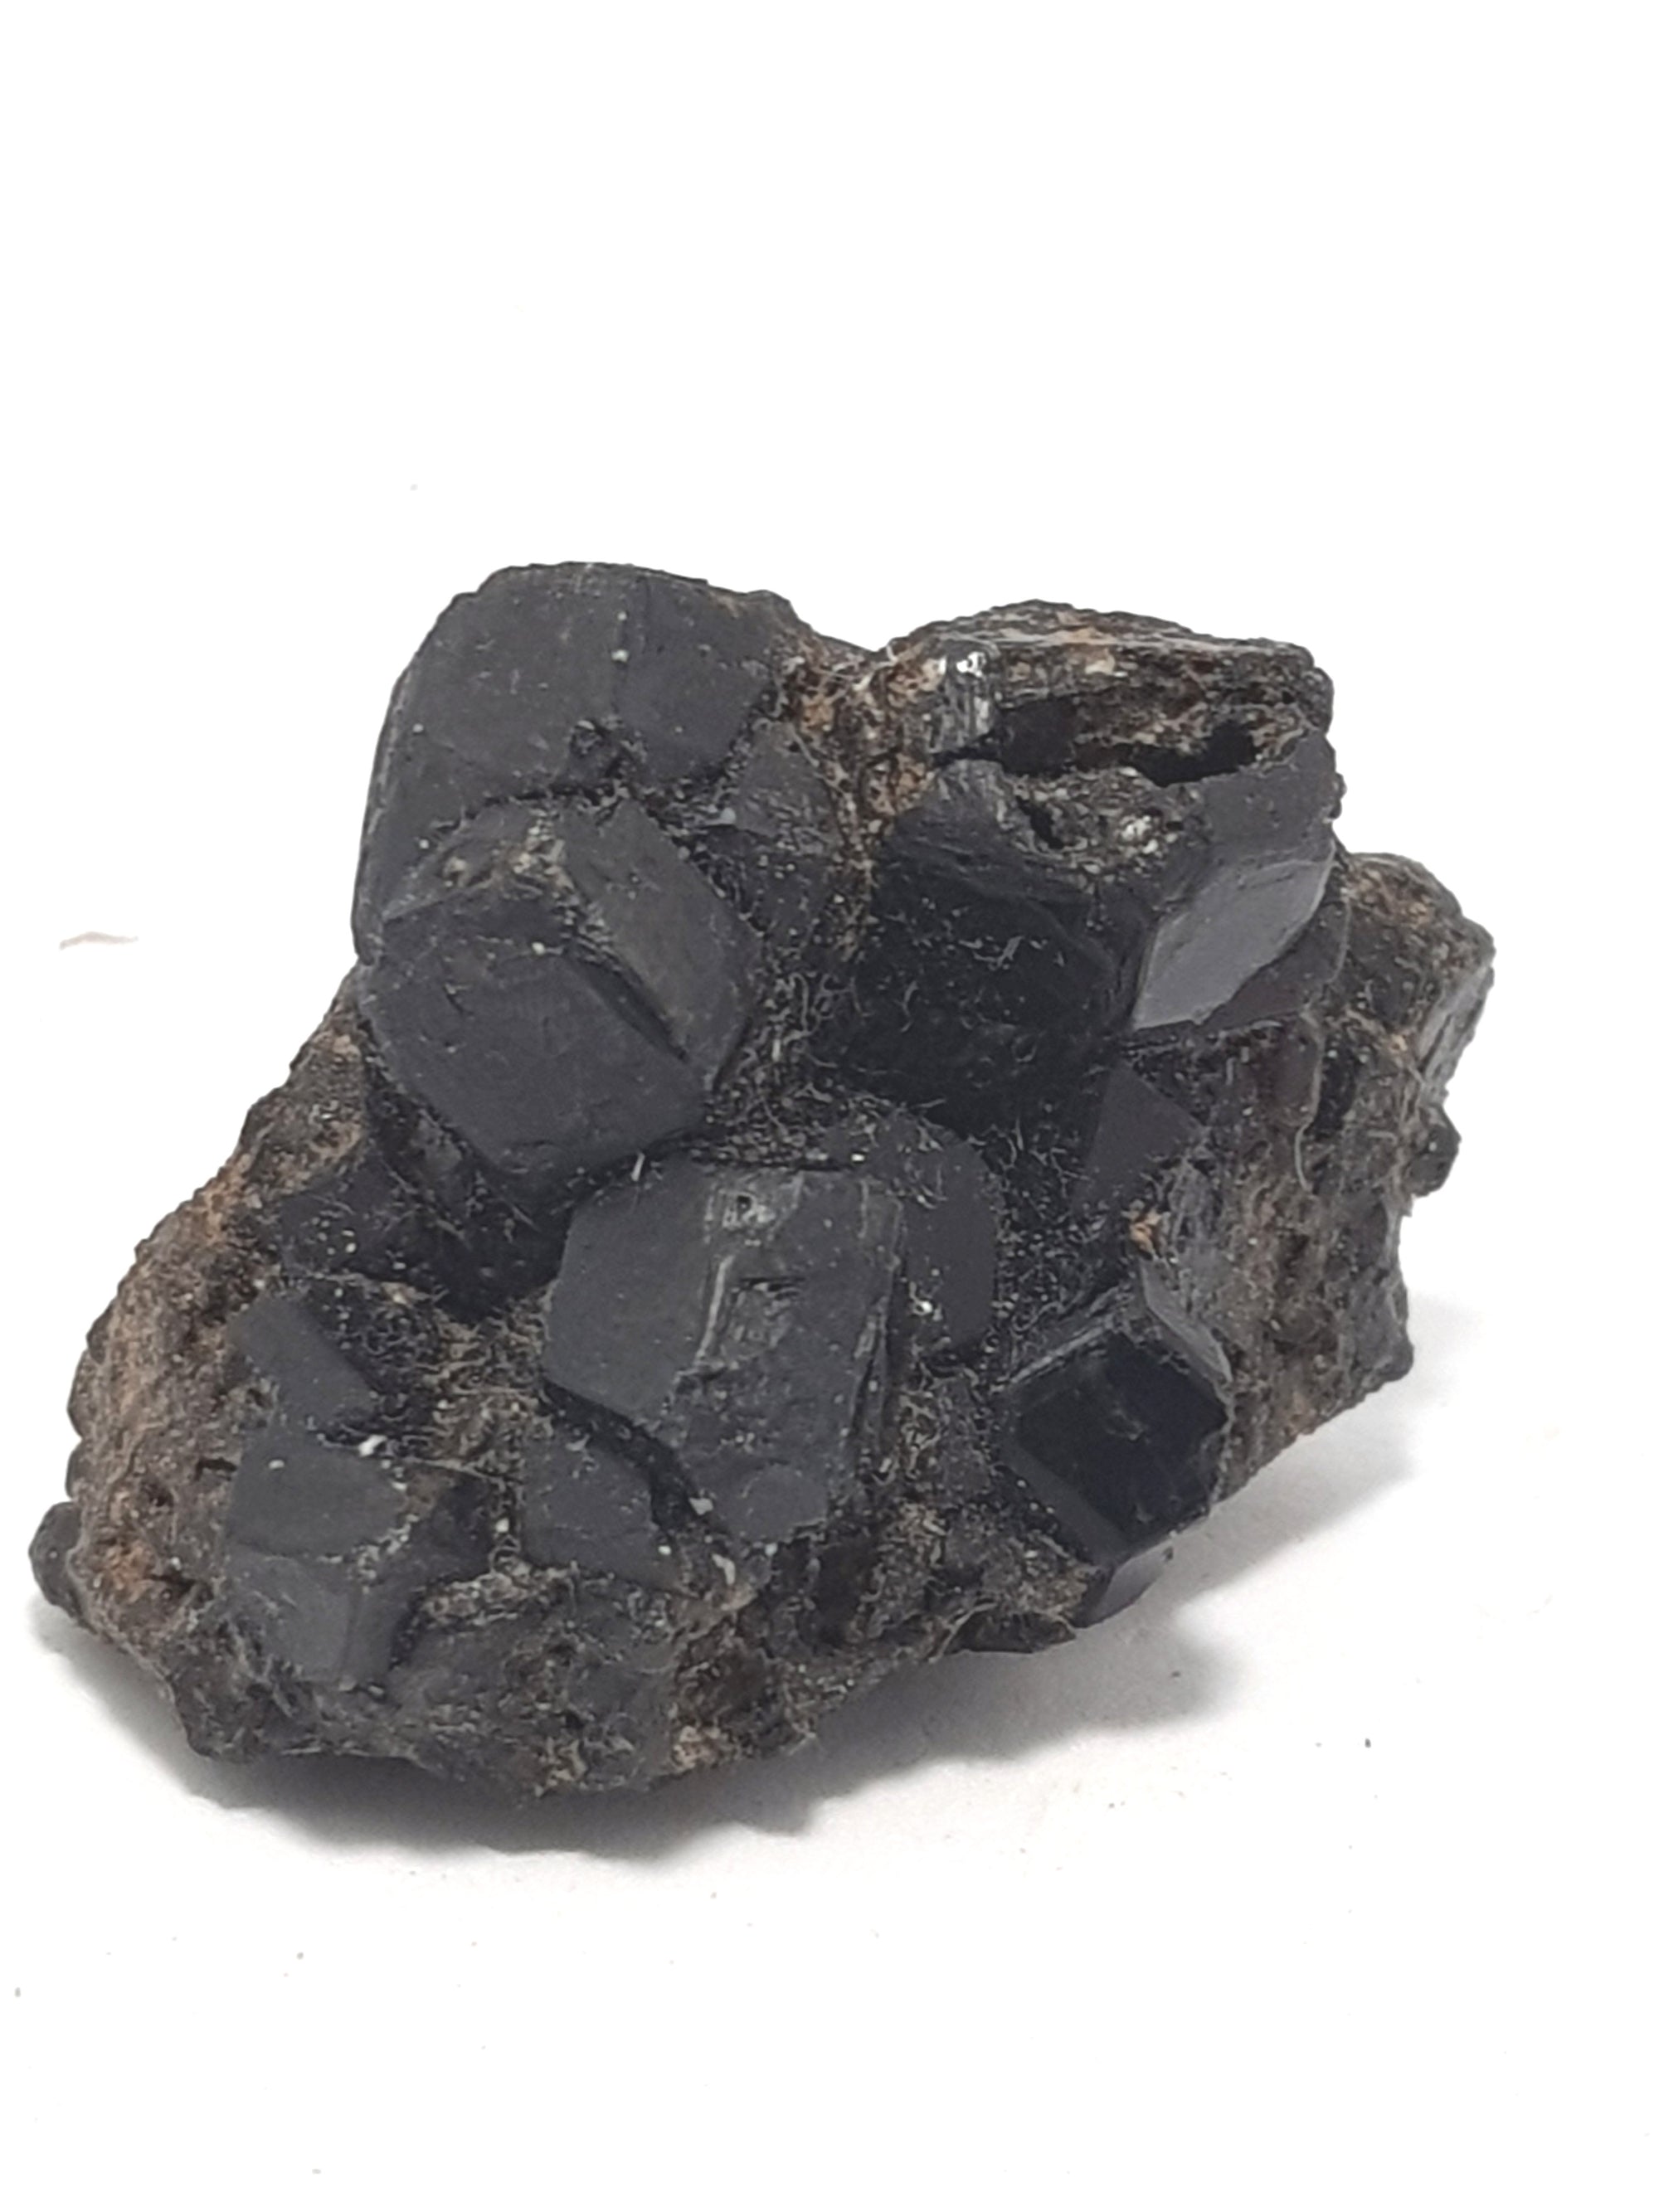 Melanite. Well formed dodecahedral crystals of black garnet. The crystals are relatively large and clustered together.